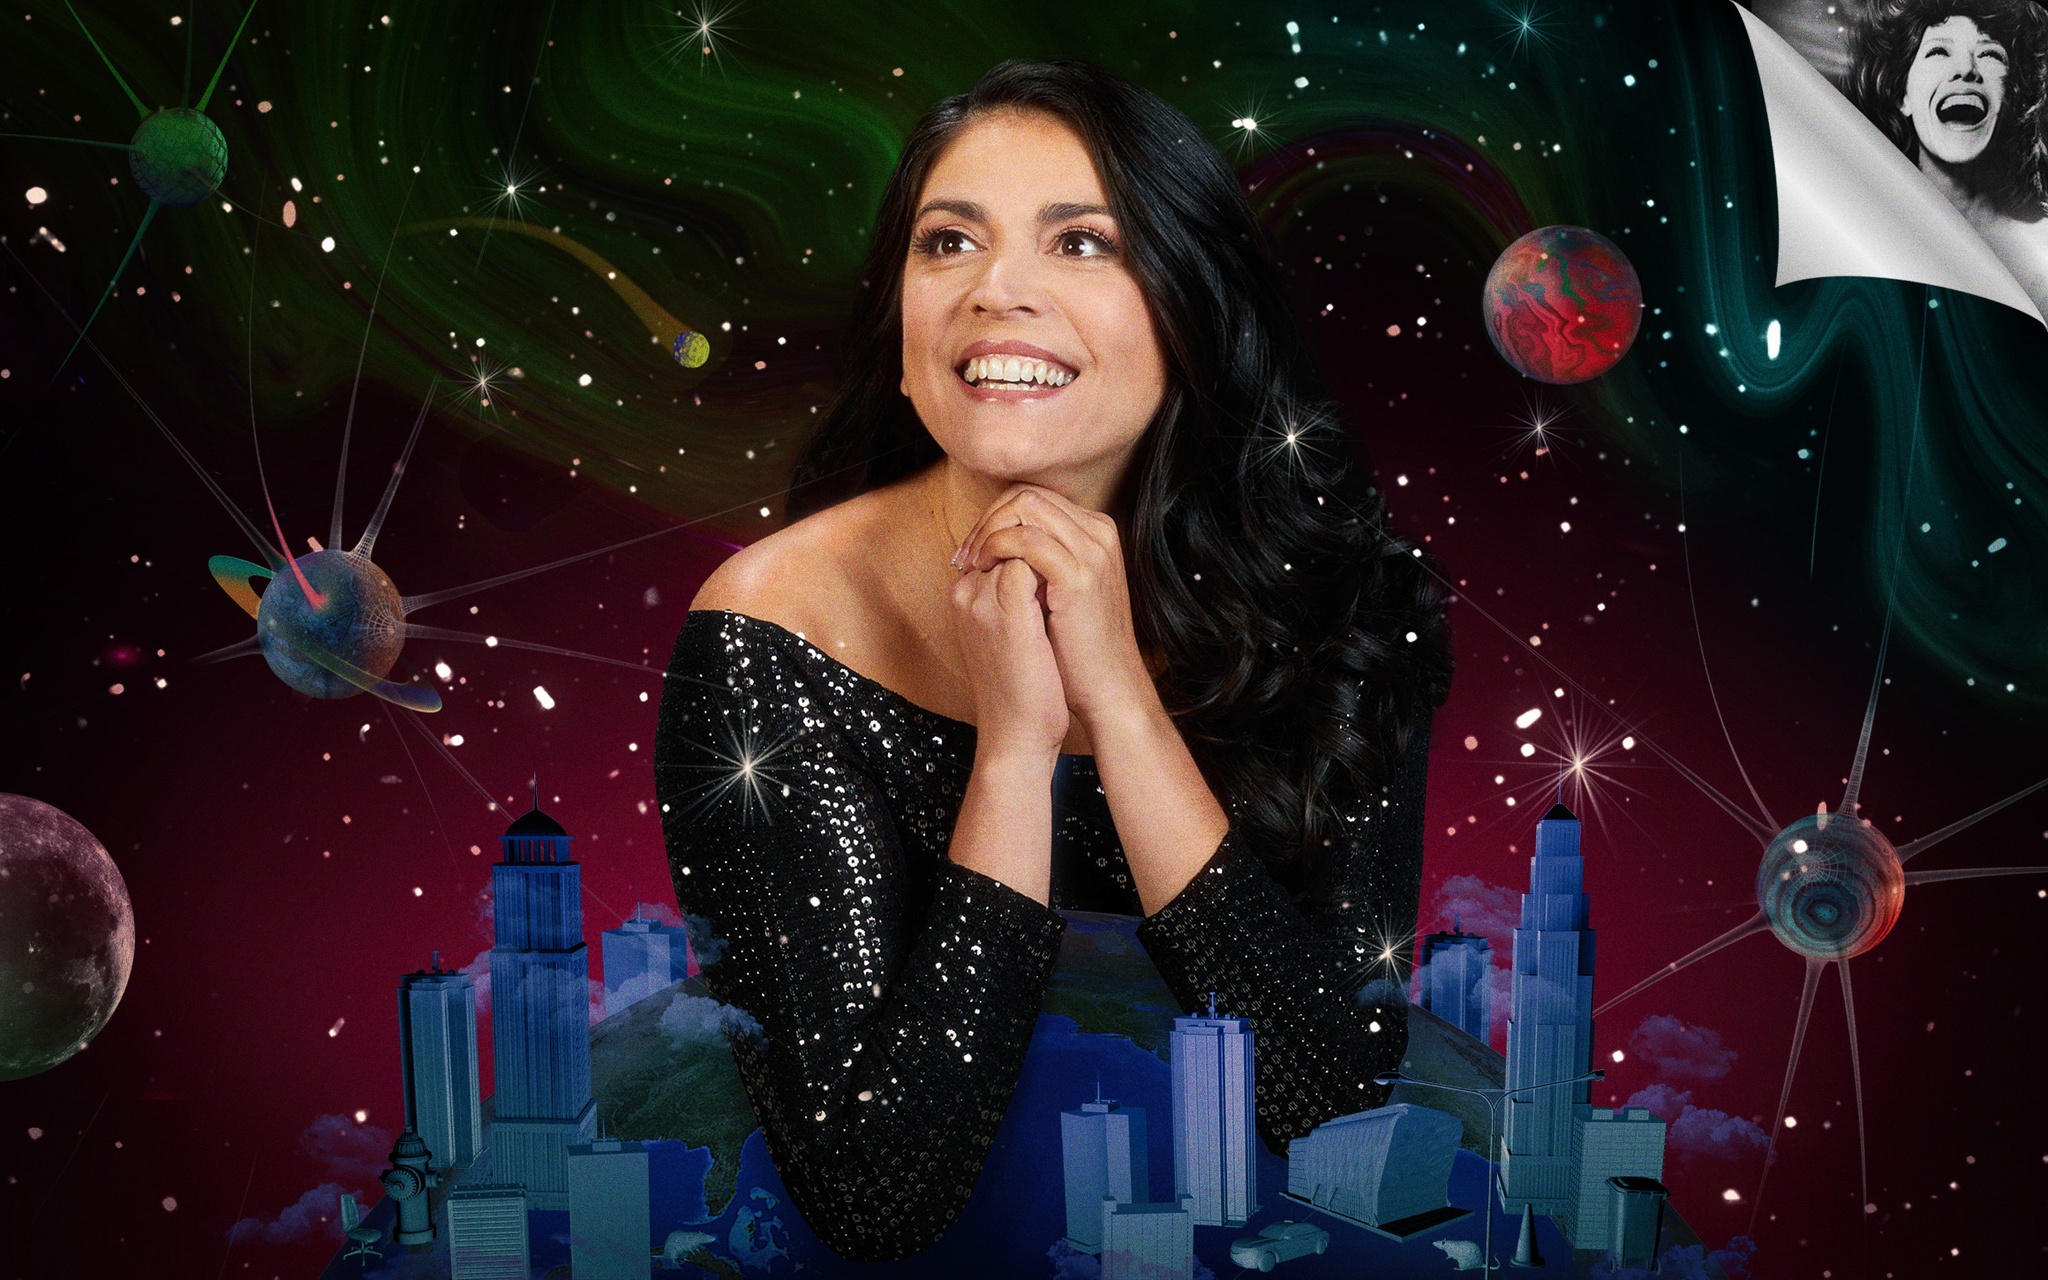 The actor Cecily Strong with her arms propping her head up as she leans on a model city. Behind her is a cartoonish background of stars and planets. She wears a black sequined top that sparkles in the light.